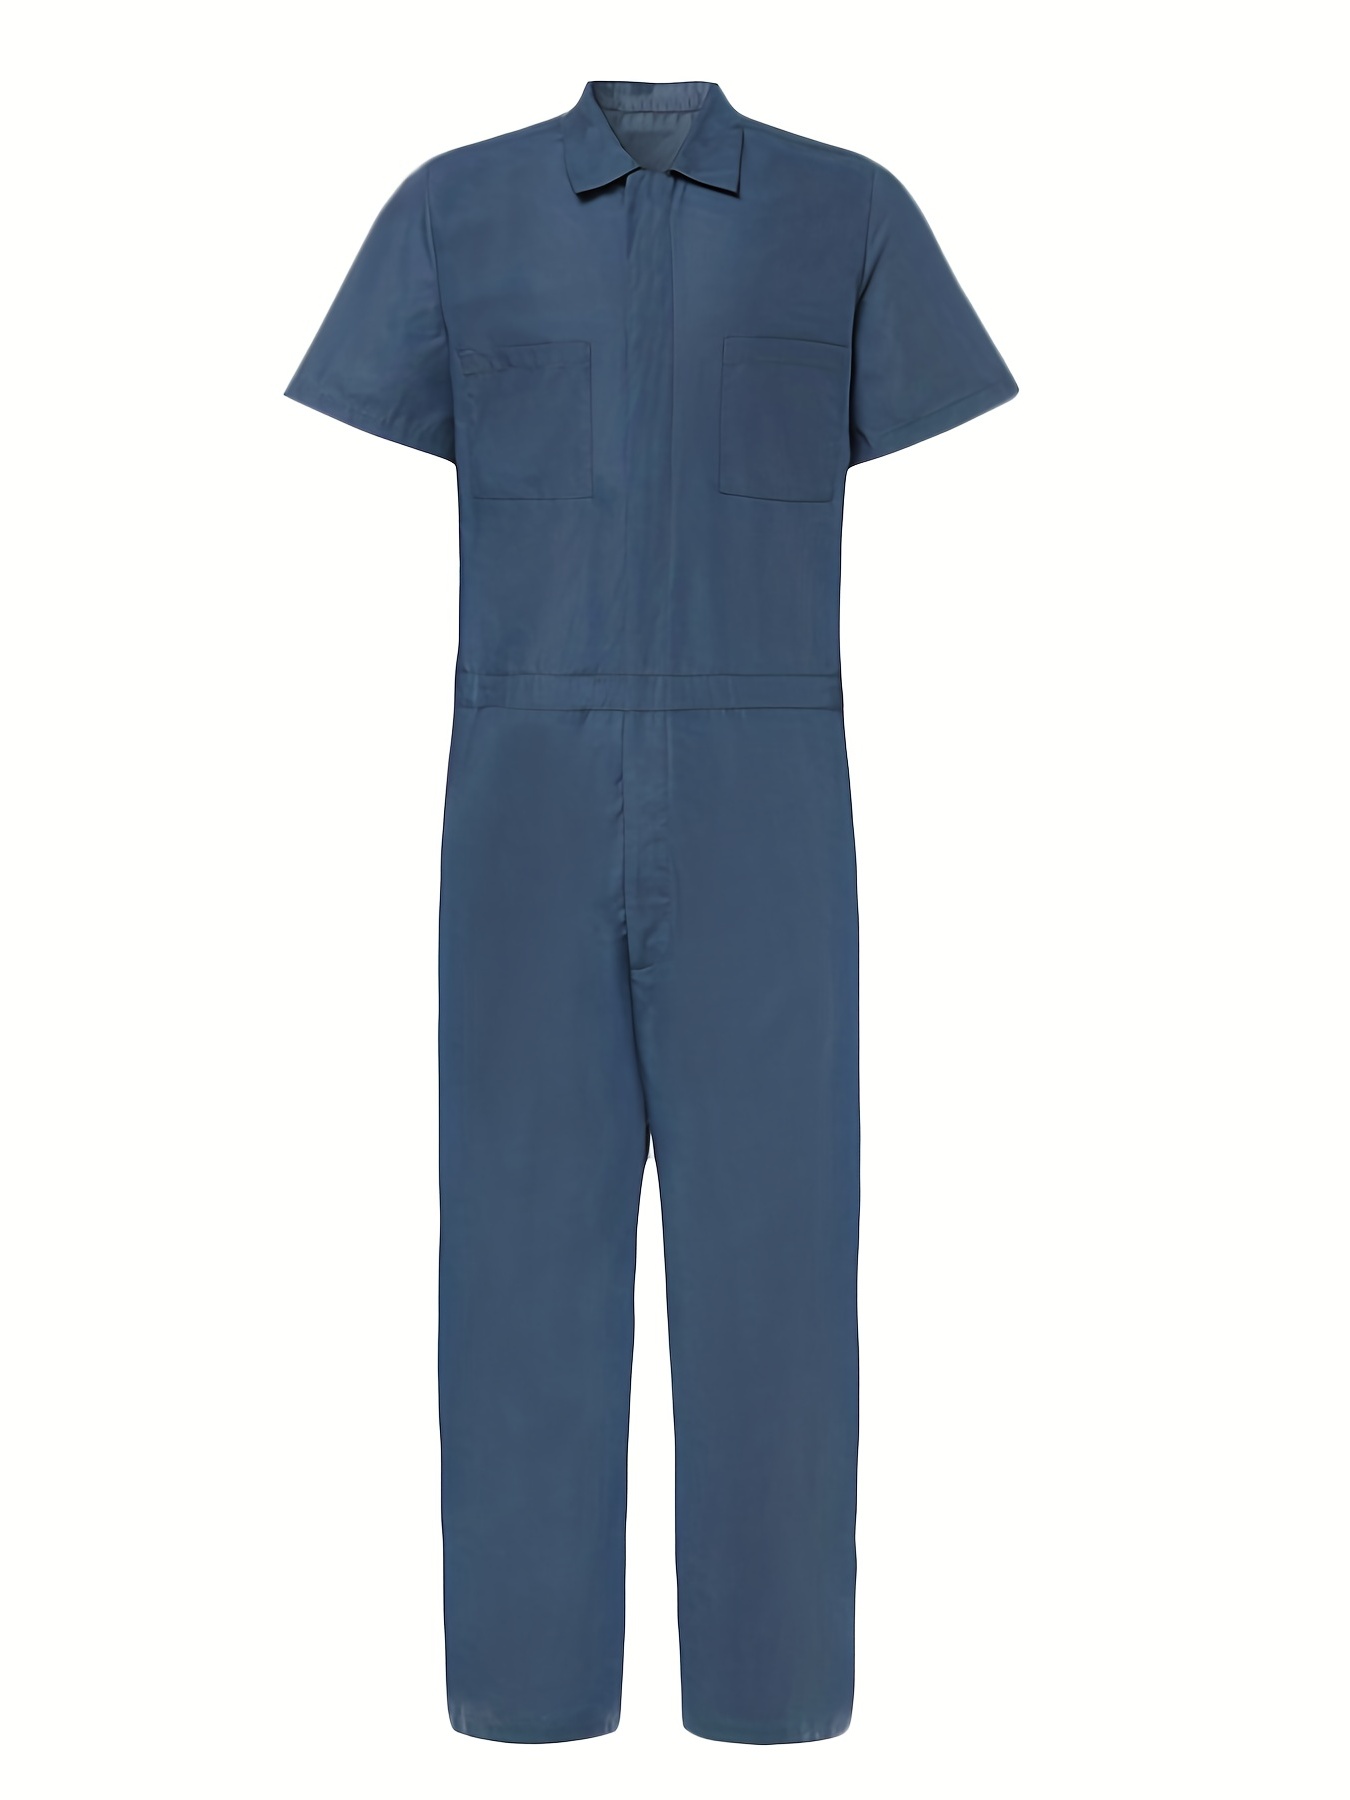 Men's Work Overalls Relaxed Fit Long Sleeve Coverall Button Down  Multi-Pocket Denim Cargo Workwear Jumpsuits